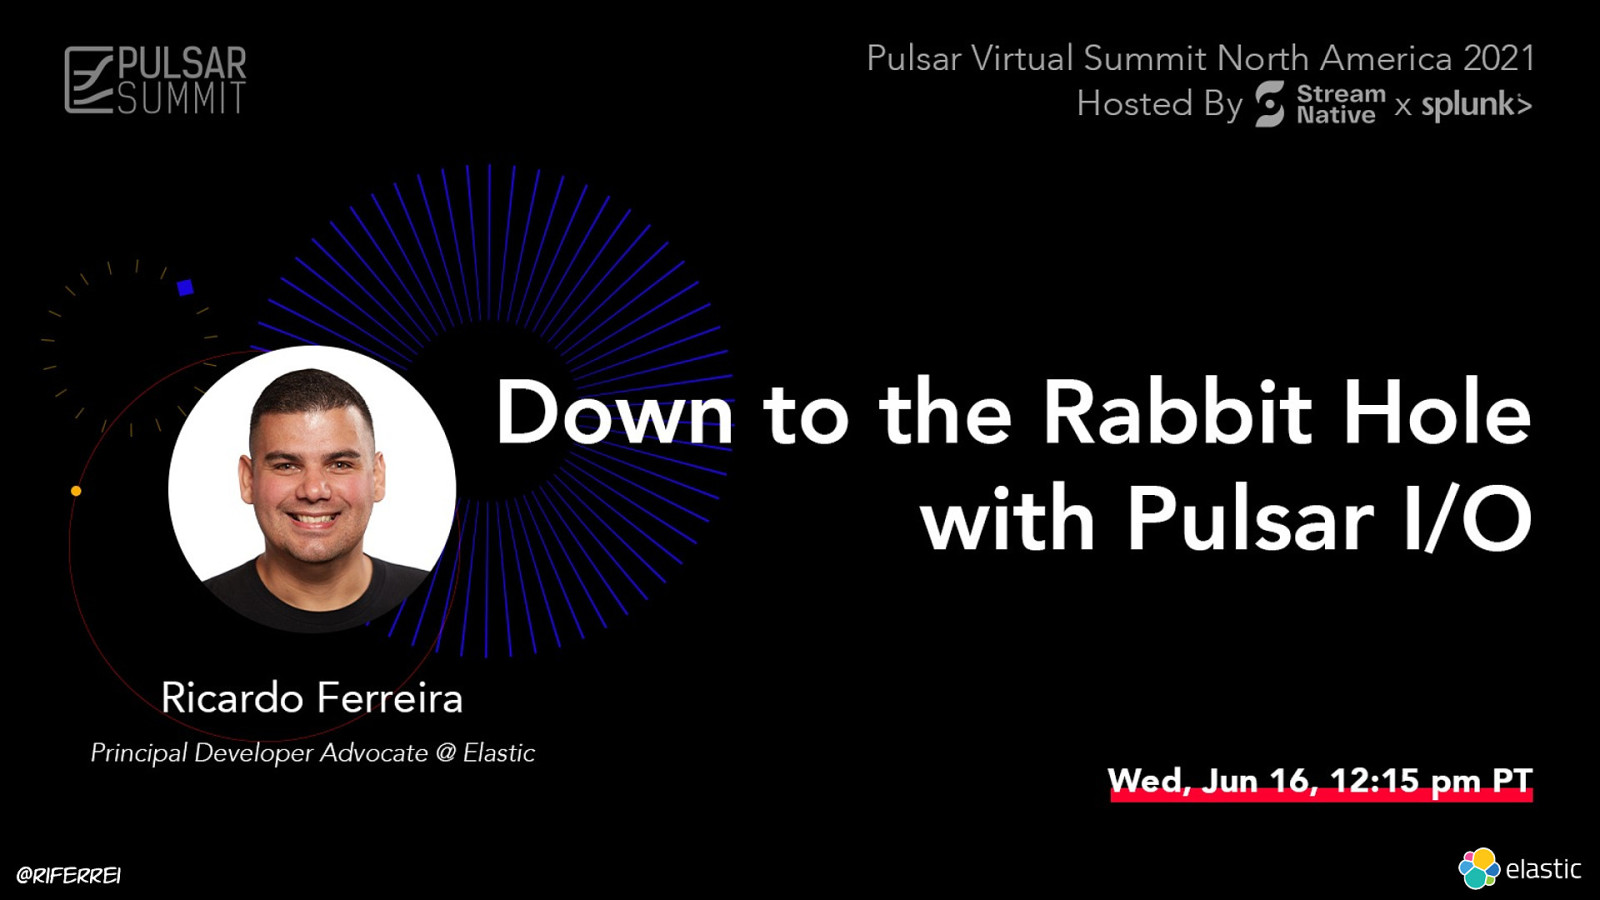 Down to the Rabbit Hole with Pulsar I/O